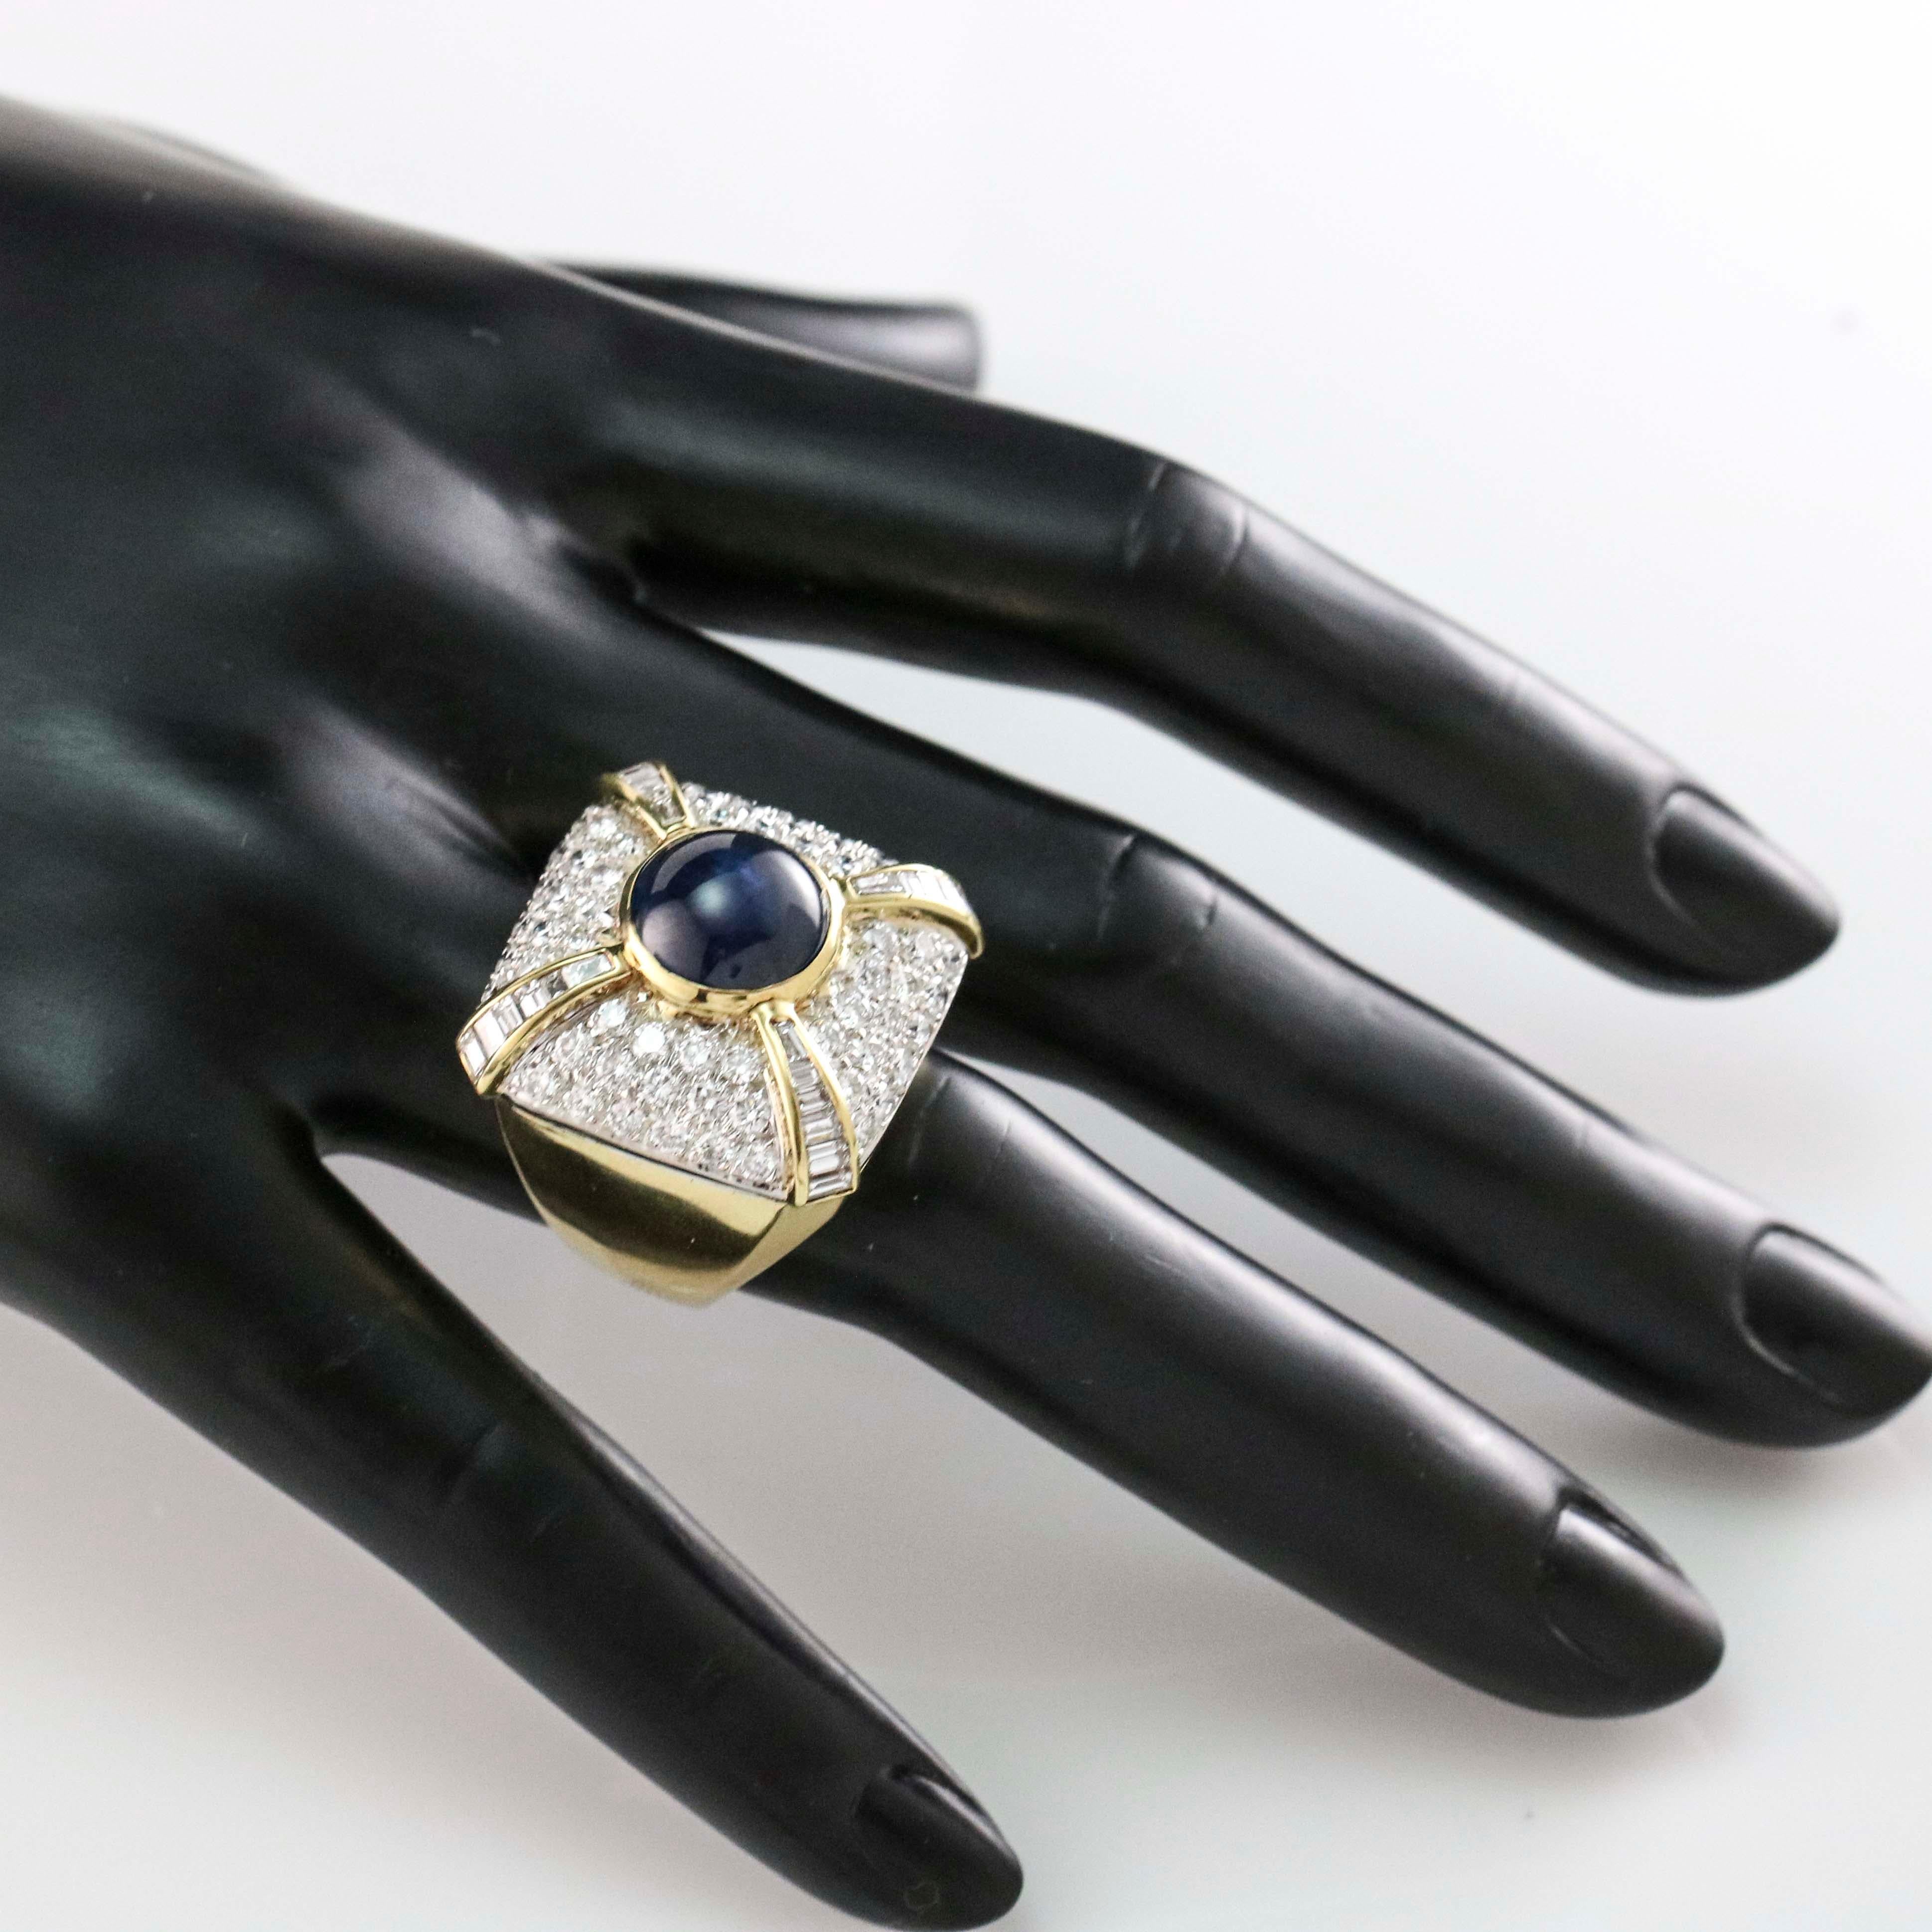 9.21 Carat Blue Sapphire and Diamond Cocktail Ring For Sale 2